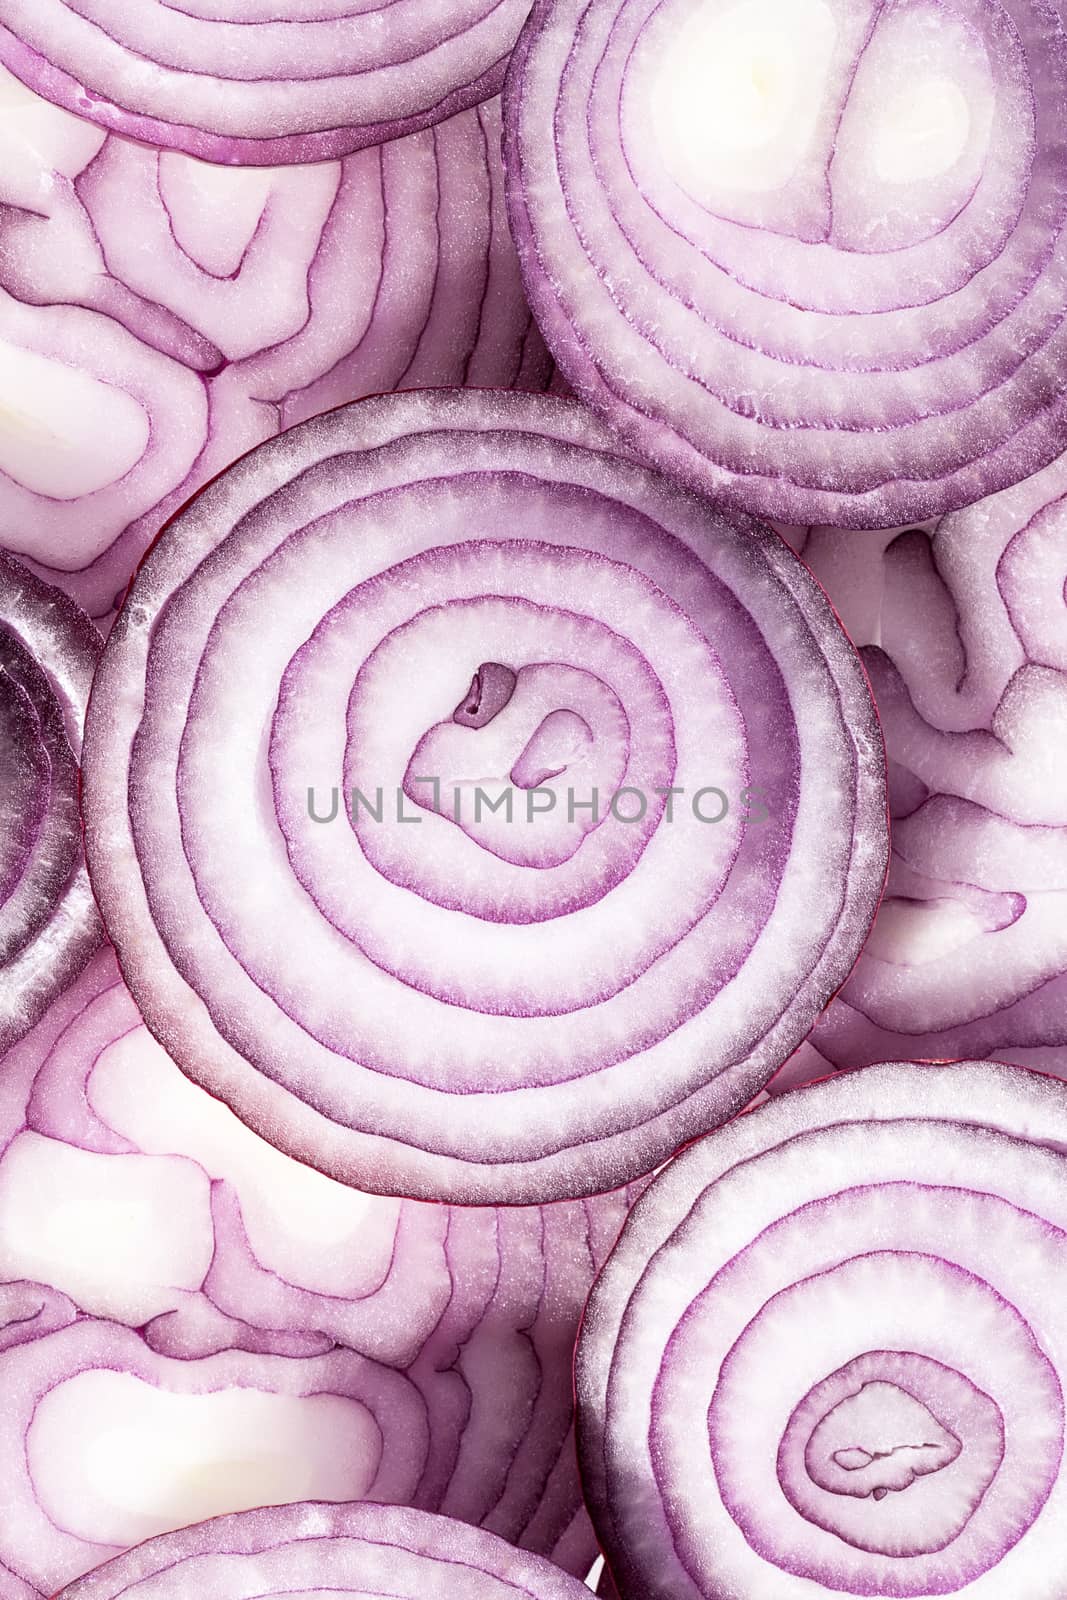 Background of red onion slices, close up